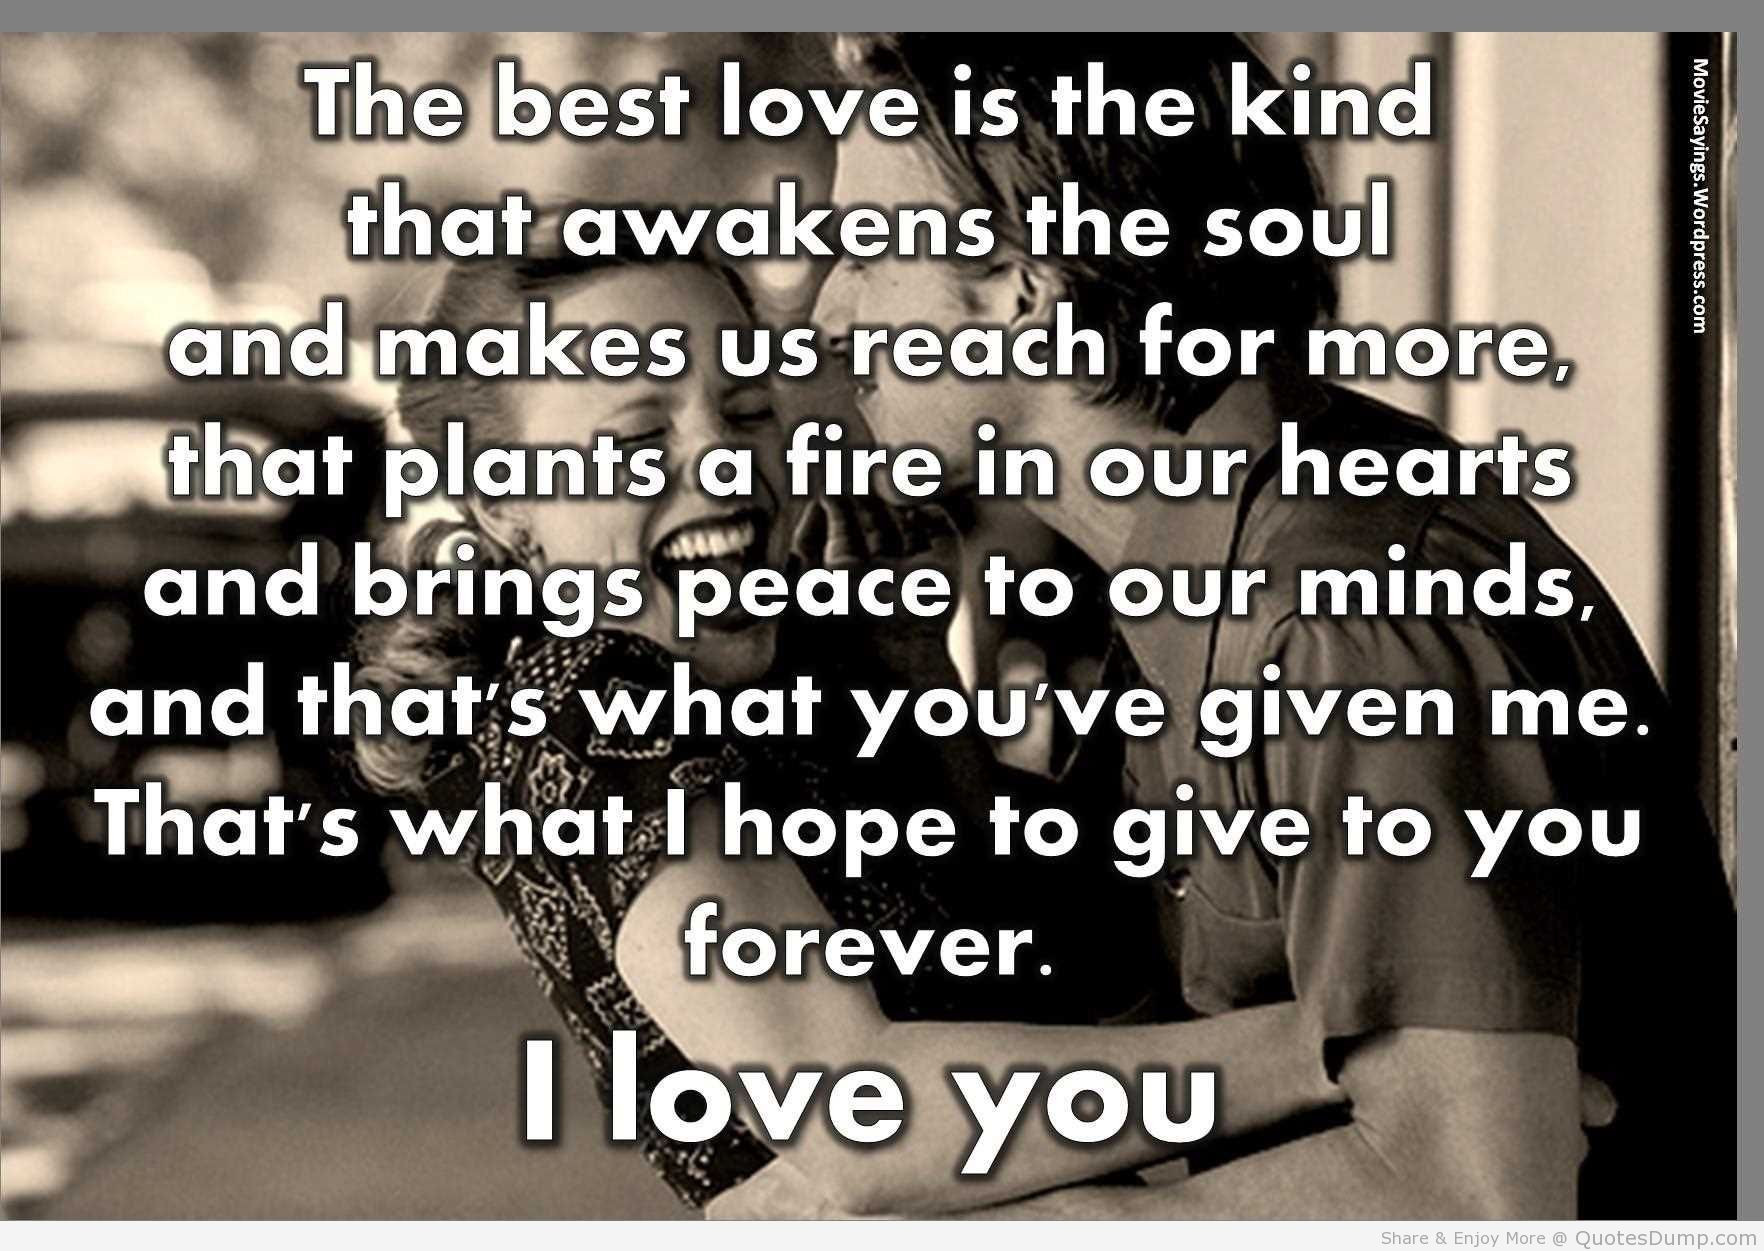 The Best Quotes About Love
 The Notebook Quotes The Best Kind Love – Quotesta